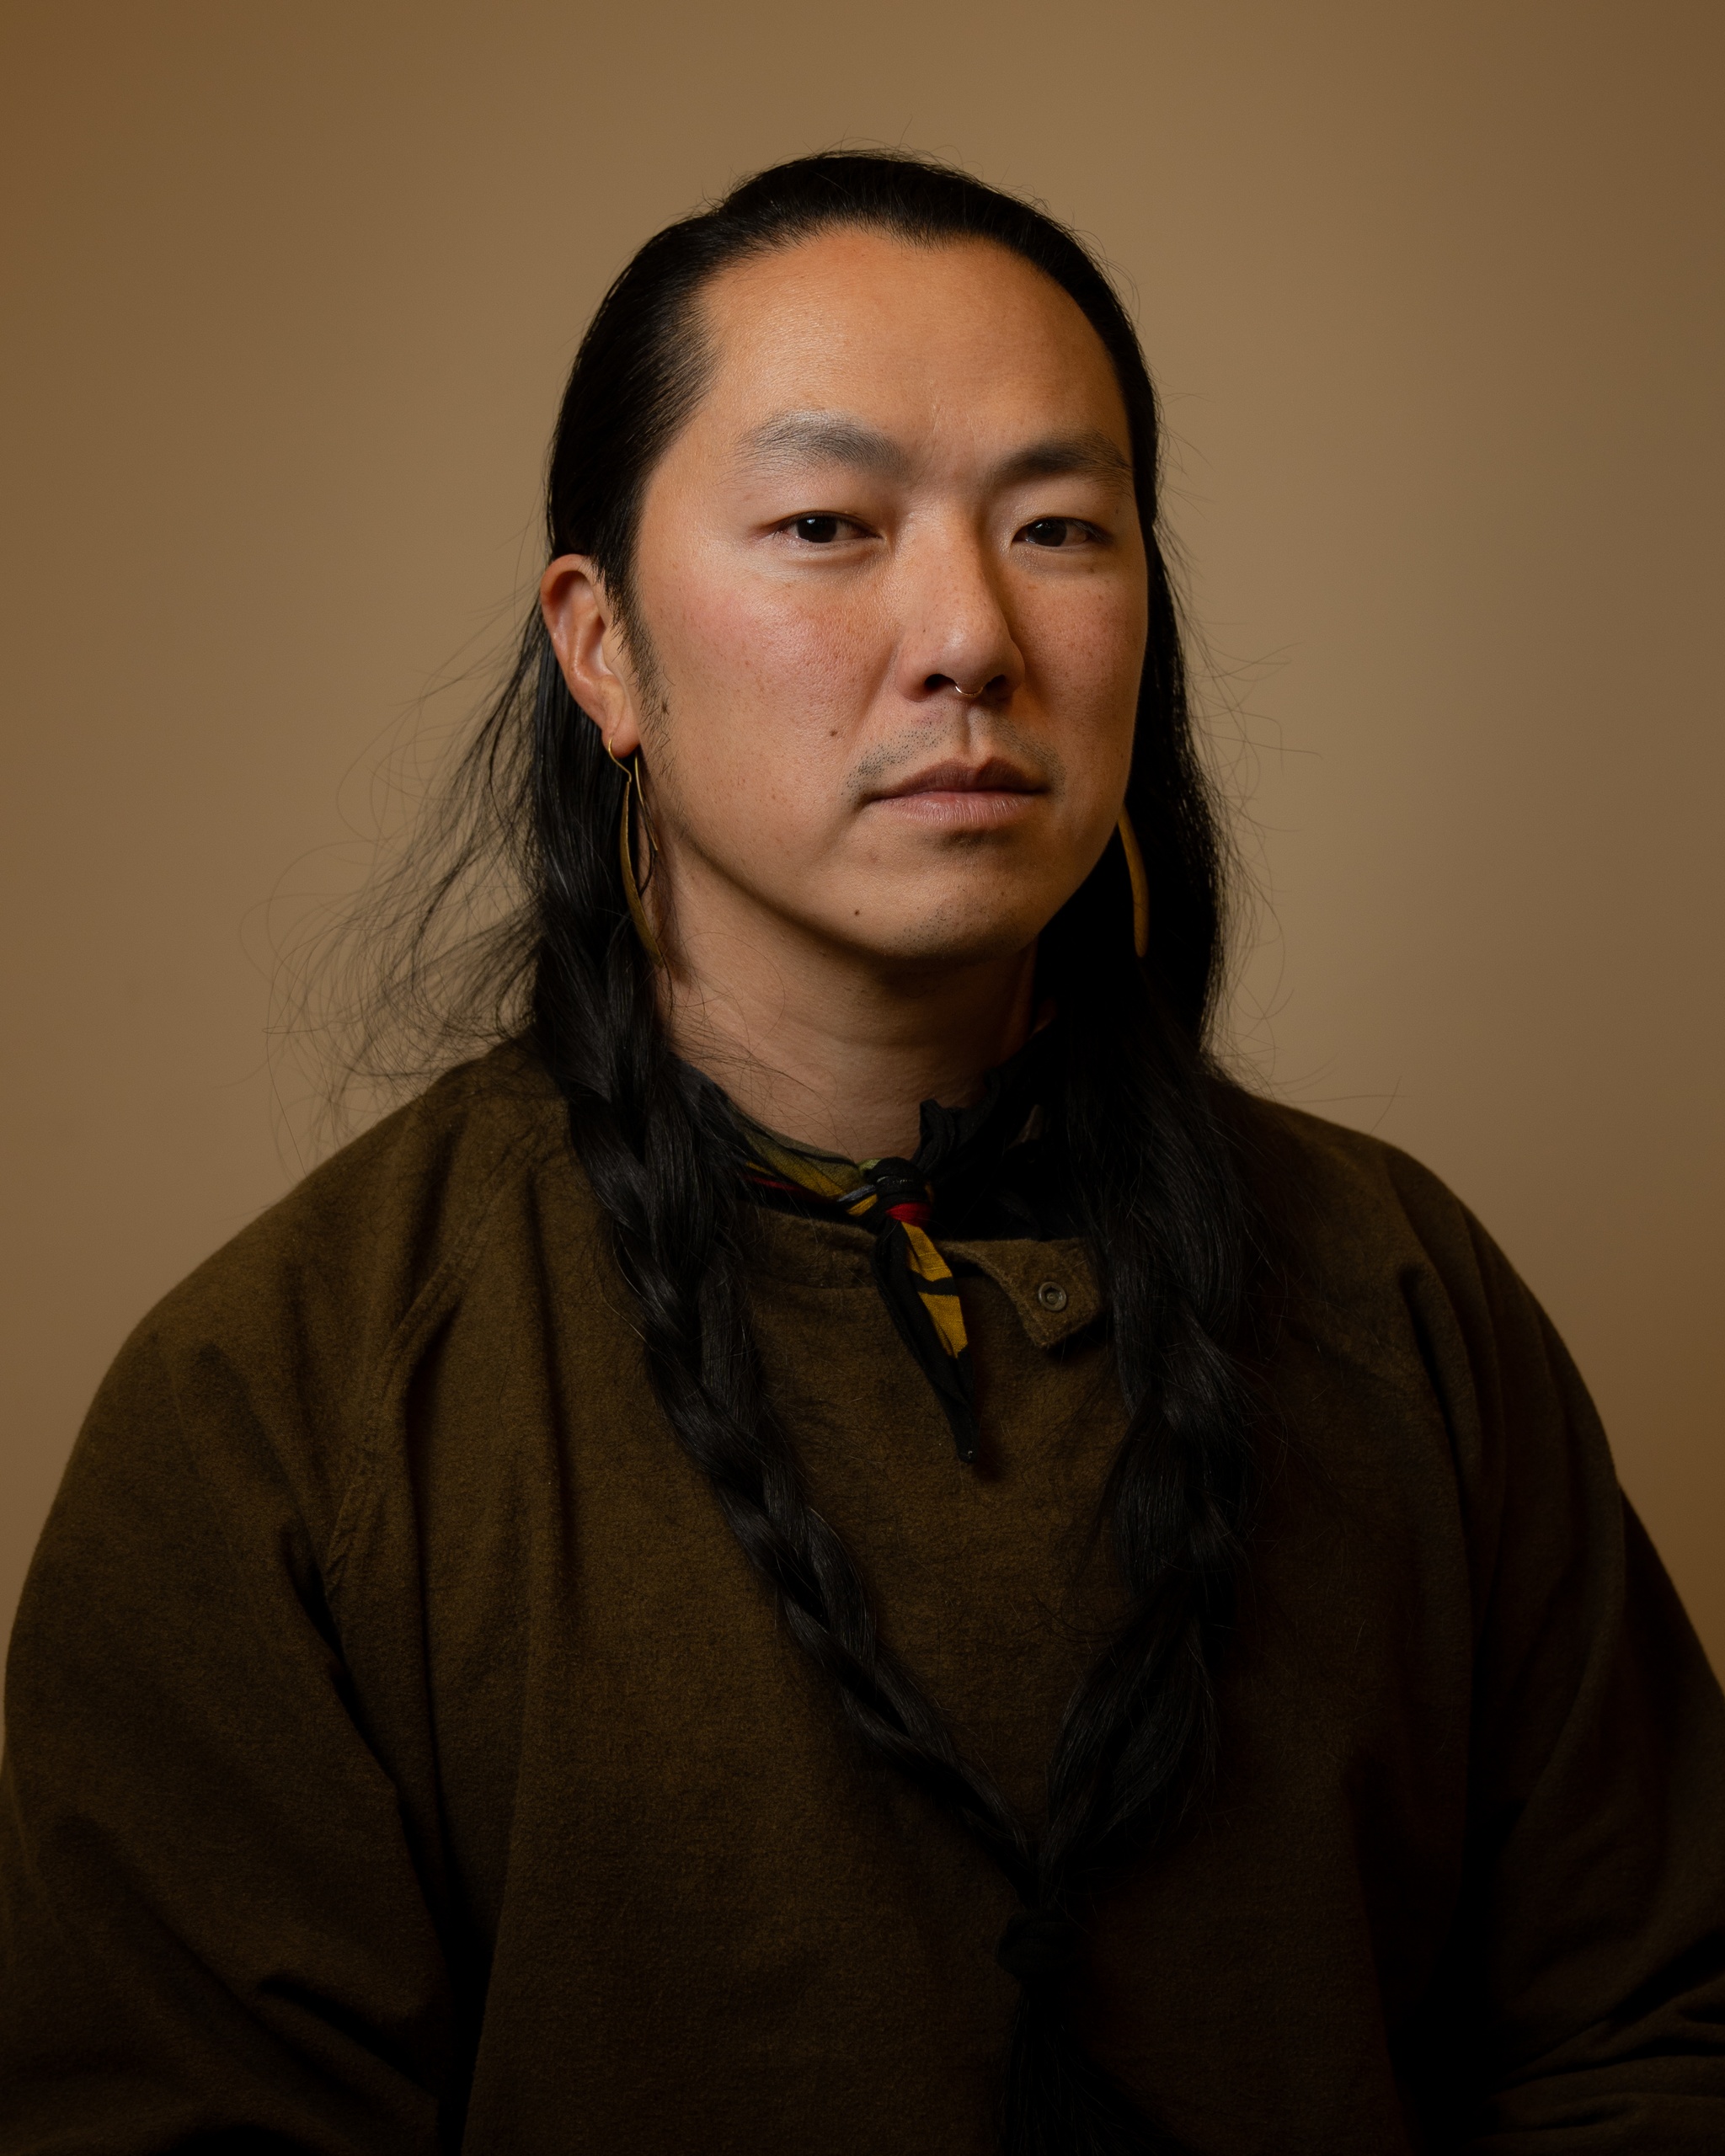 A portrait of enrico dau yang wey who poses against a neutral brown background wearing a brown shirt and jacket. enrico has long dark hair pulled back behind his head. He looks directly at us.